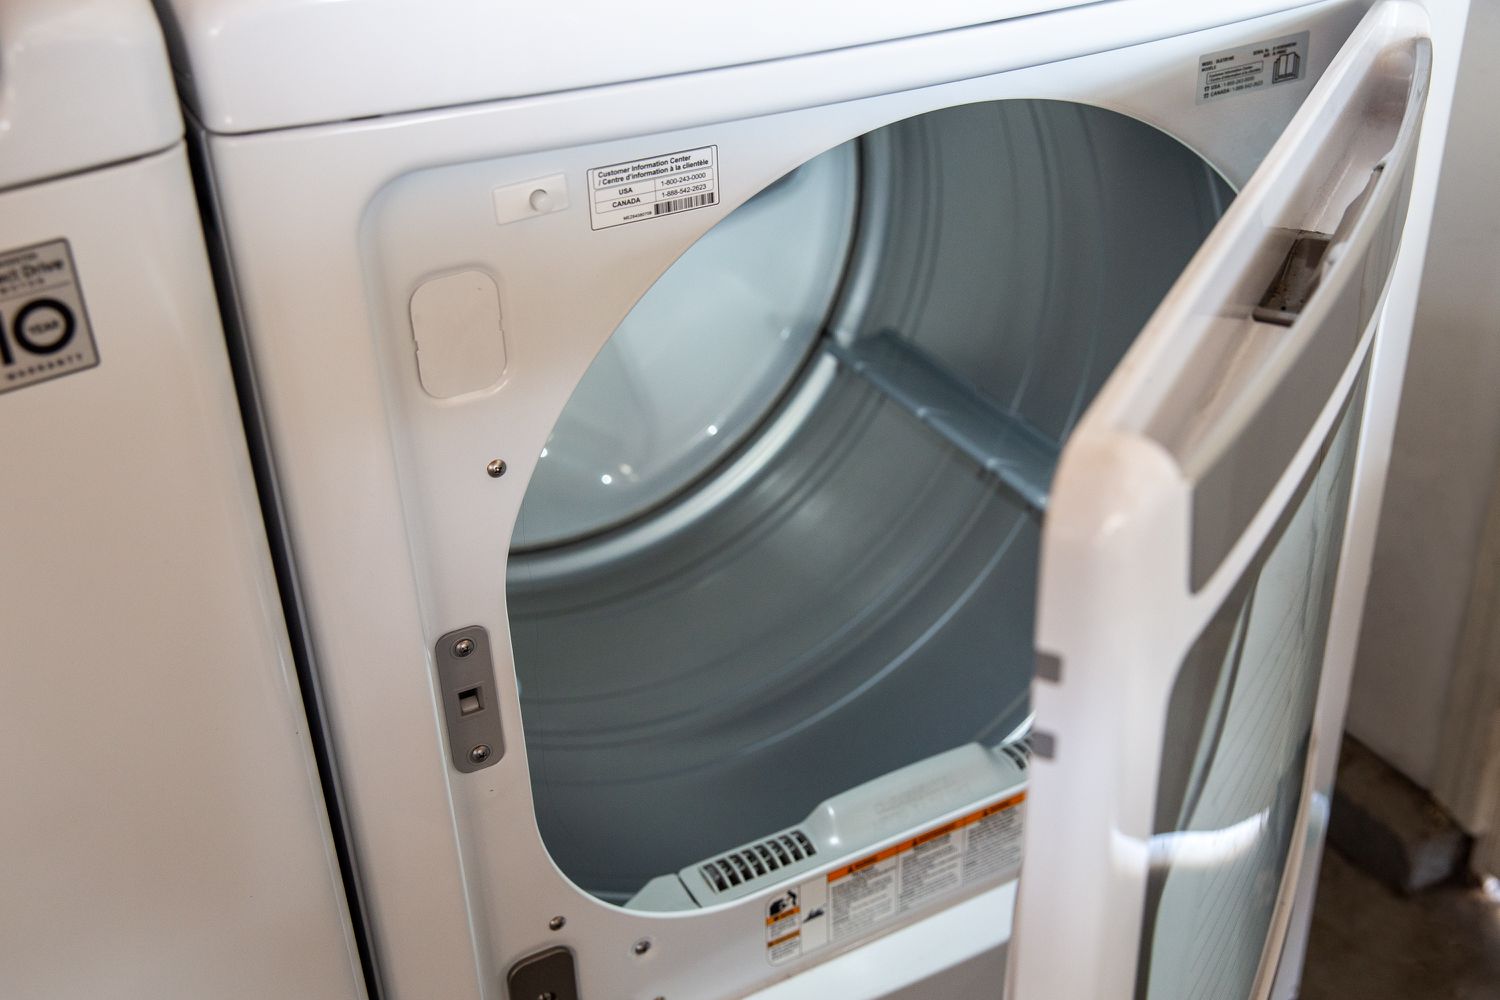 How To Fix The Error Code E77 For GE Dryer